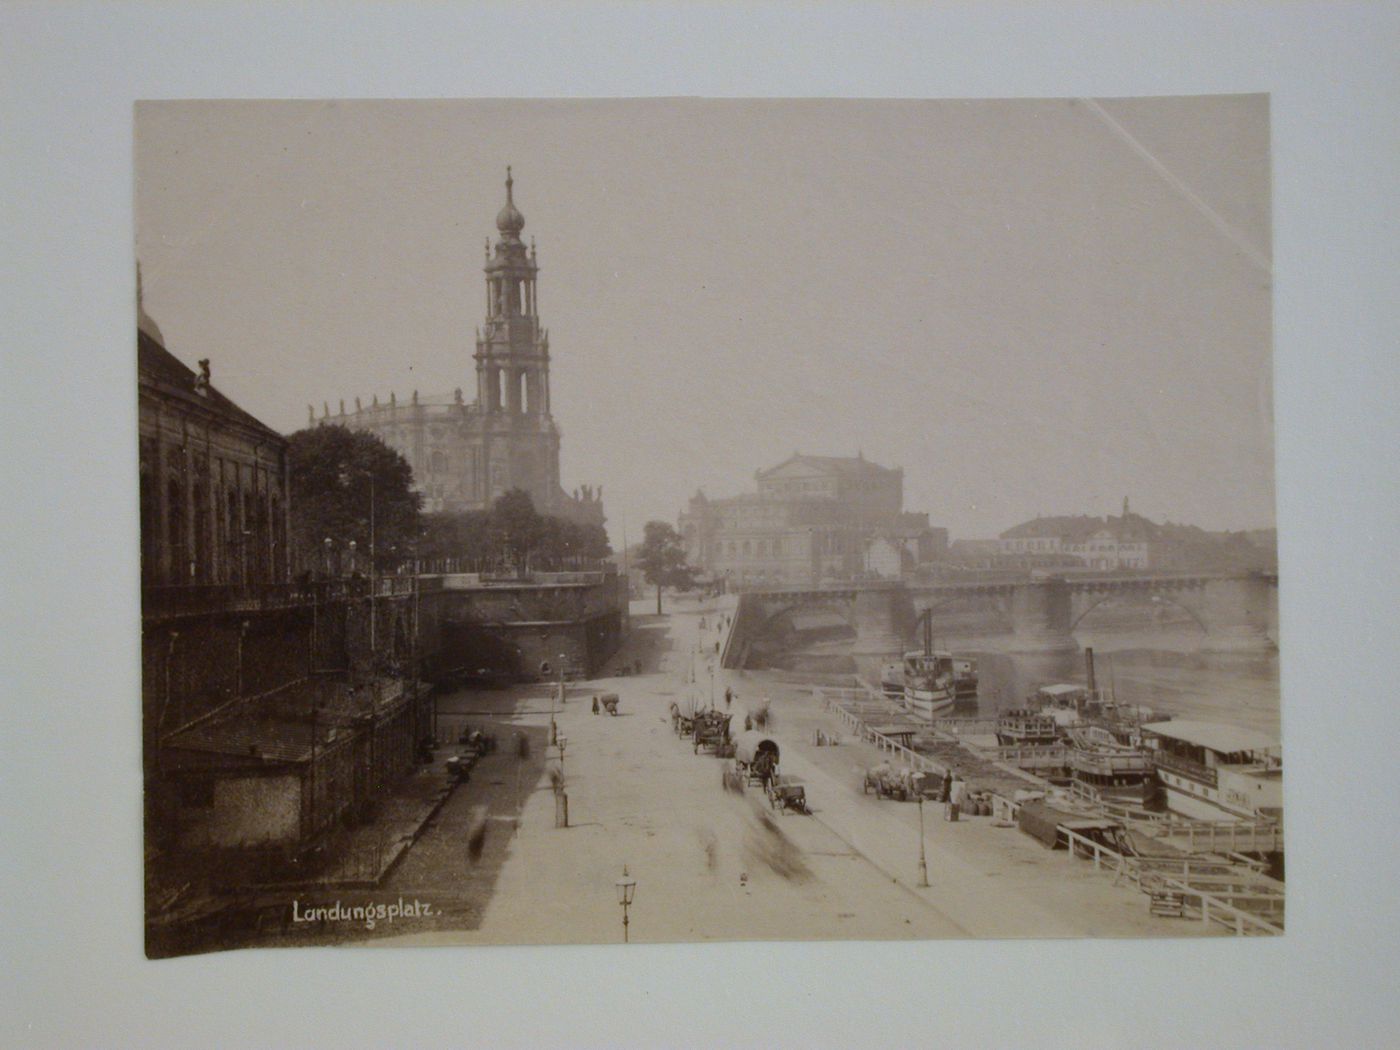 View of the port of Dresden with Brühlsche Terrasse on the left, Kathedrale Saint Trinitatis (also known as the Katholische Hofkirche [Royal Catholic Church]) in the background and the Augustusbrücke [Augustus Bridge] over the Elbe River, Dresden, Germany